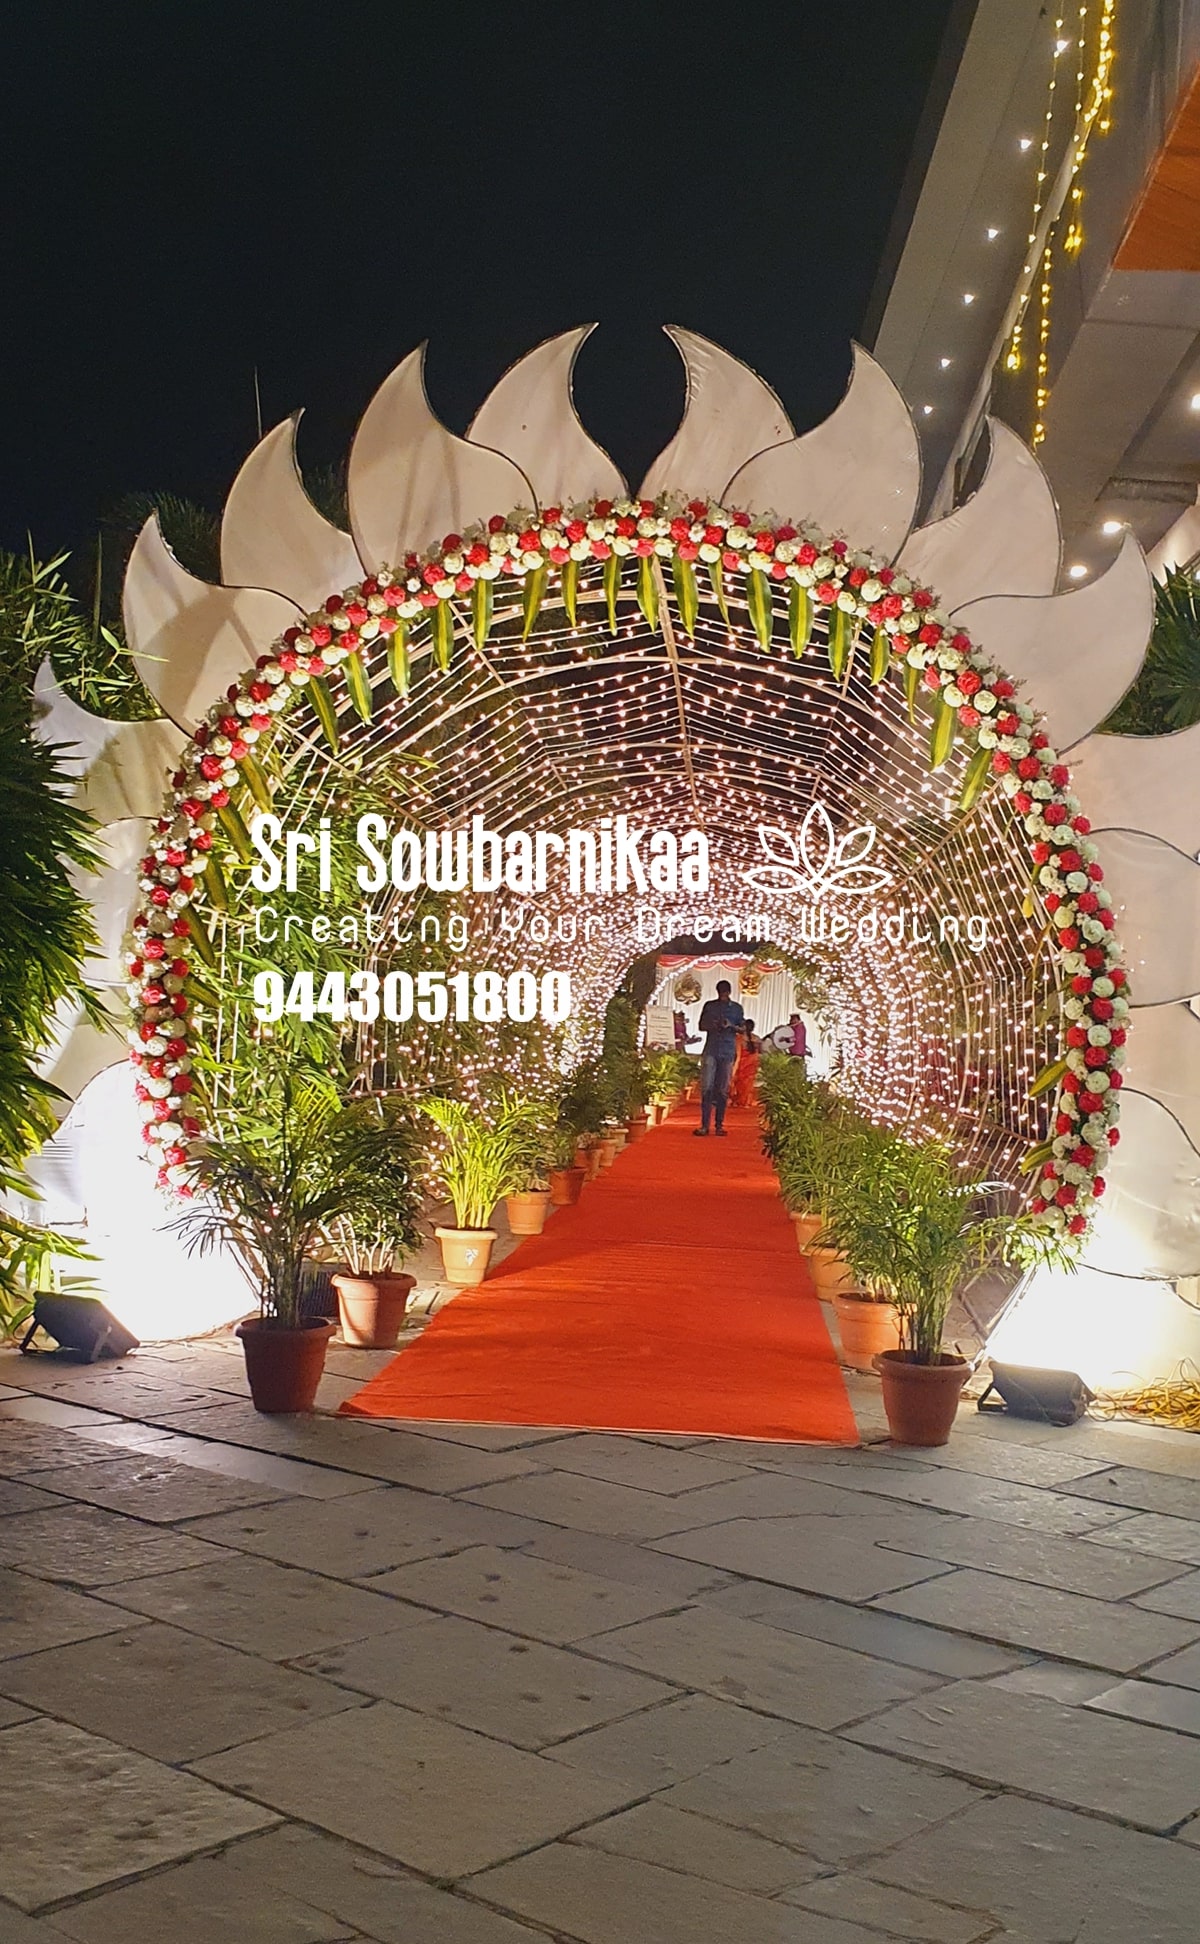 Stunning Entrance Decoration in Coimbatore by Sri Sowbarnikaa Decorators: Making Memorable First Impressions